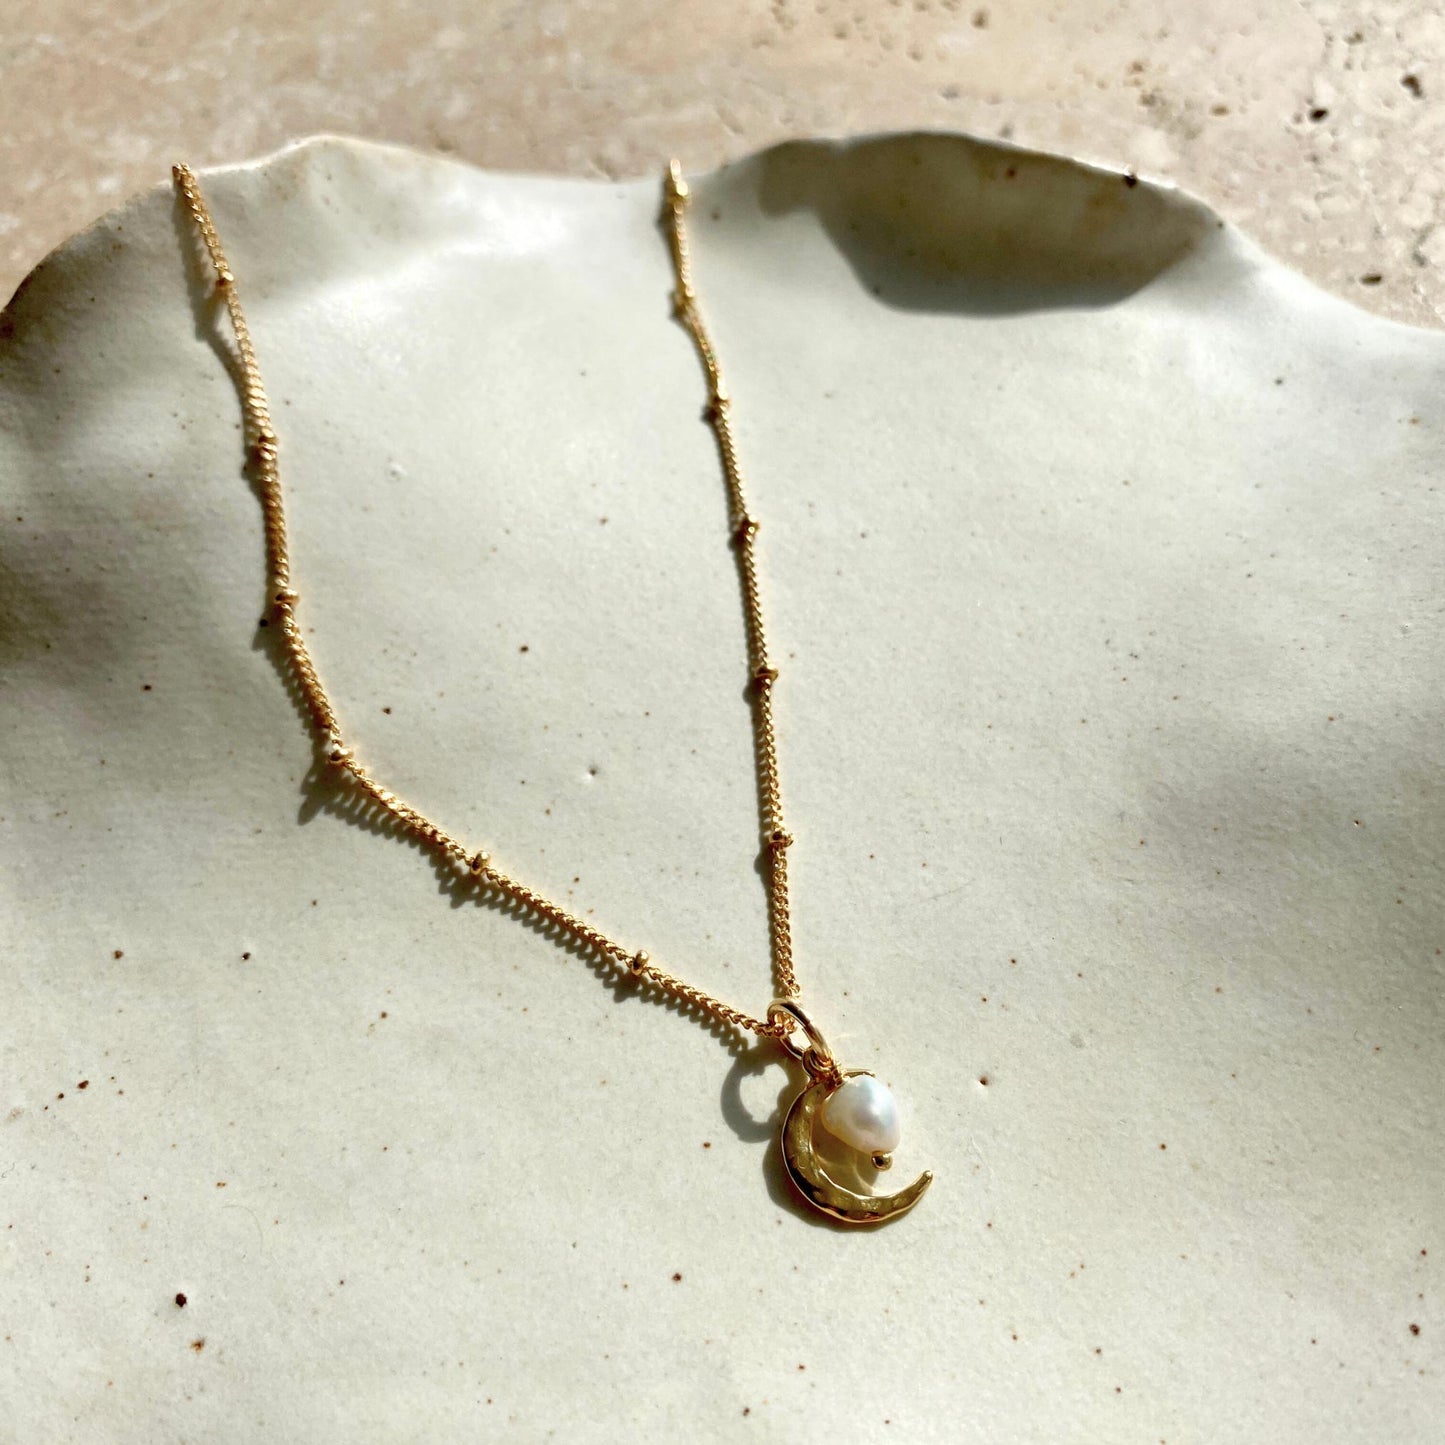 Pearl & Moon Necklace | Calm (Gold Plated)